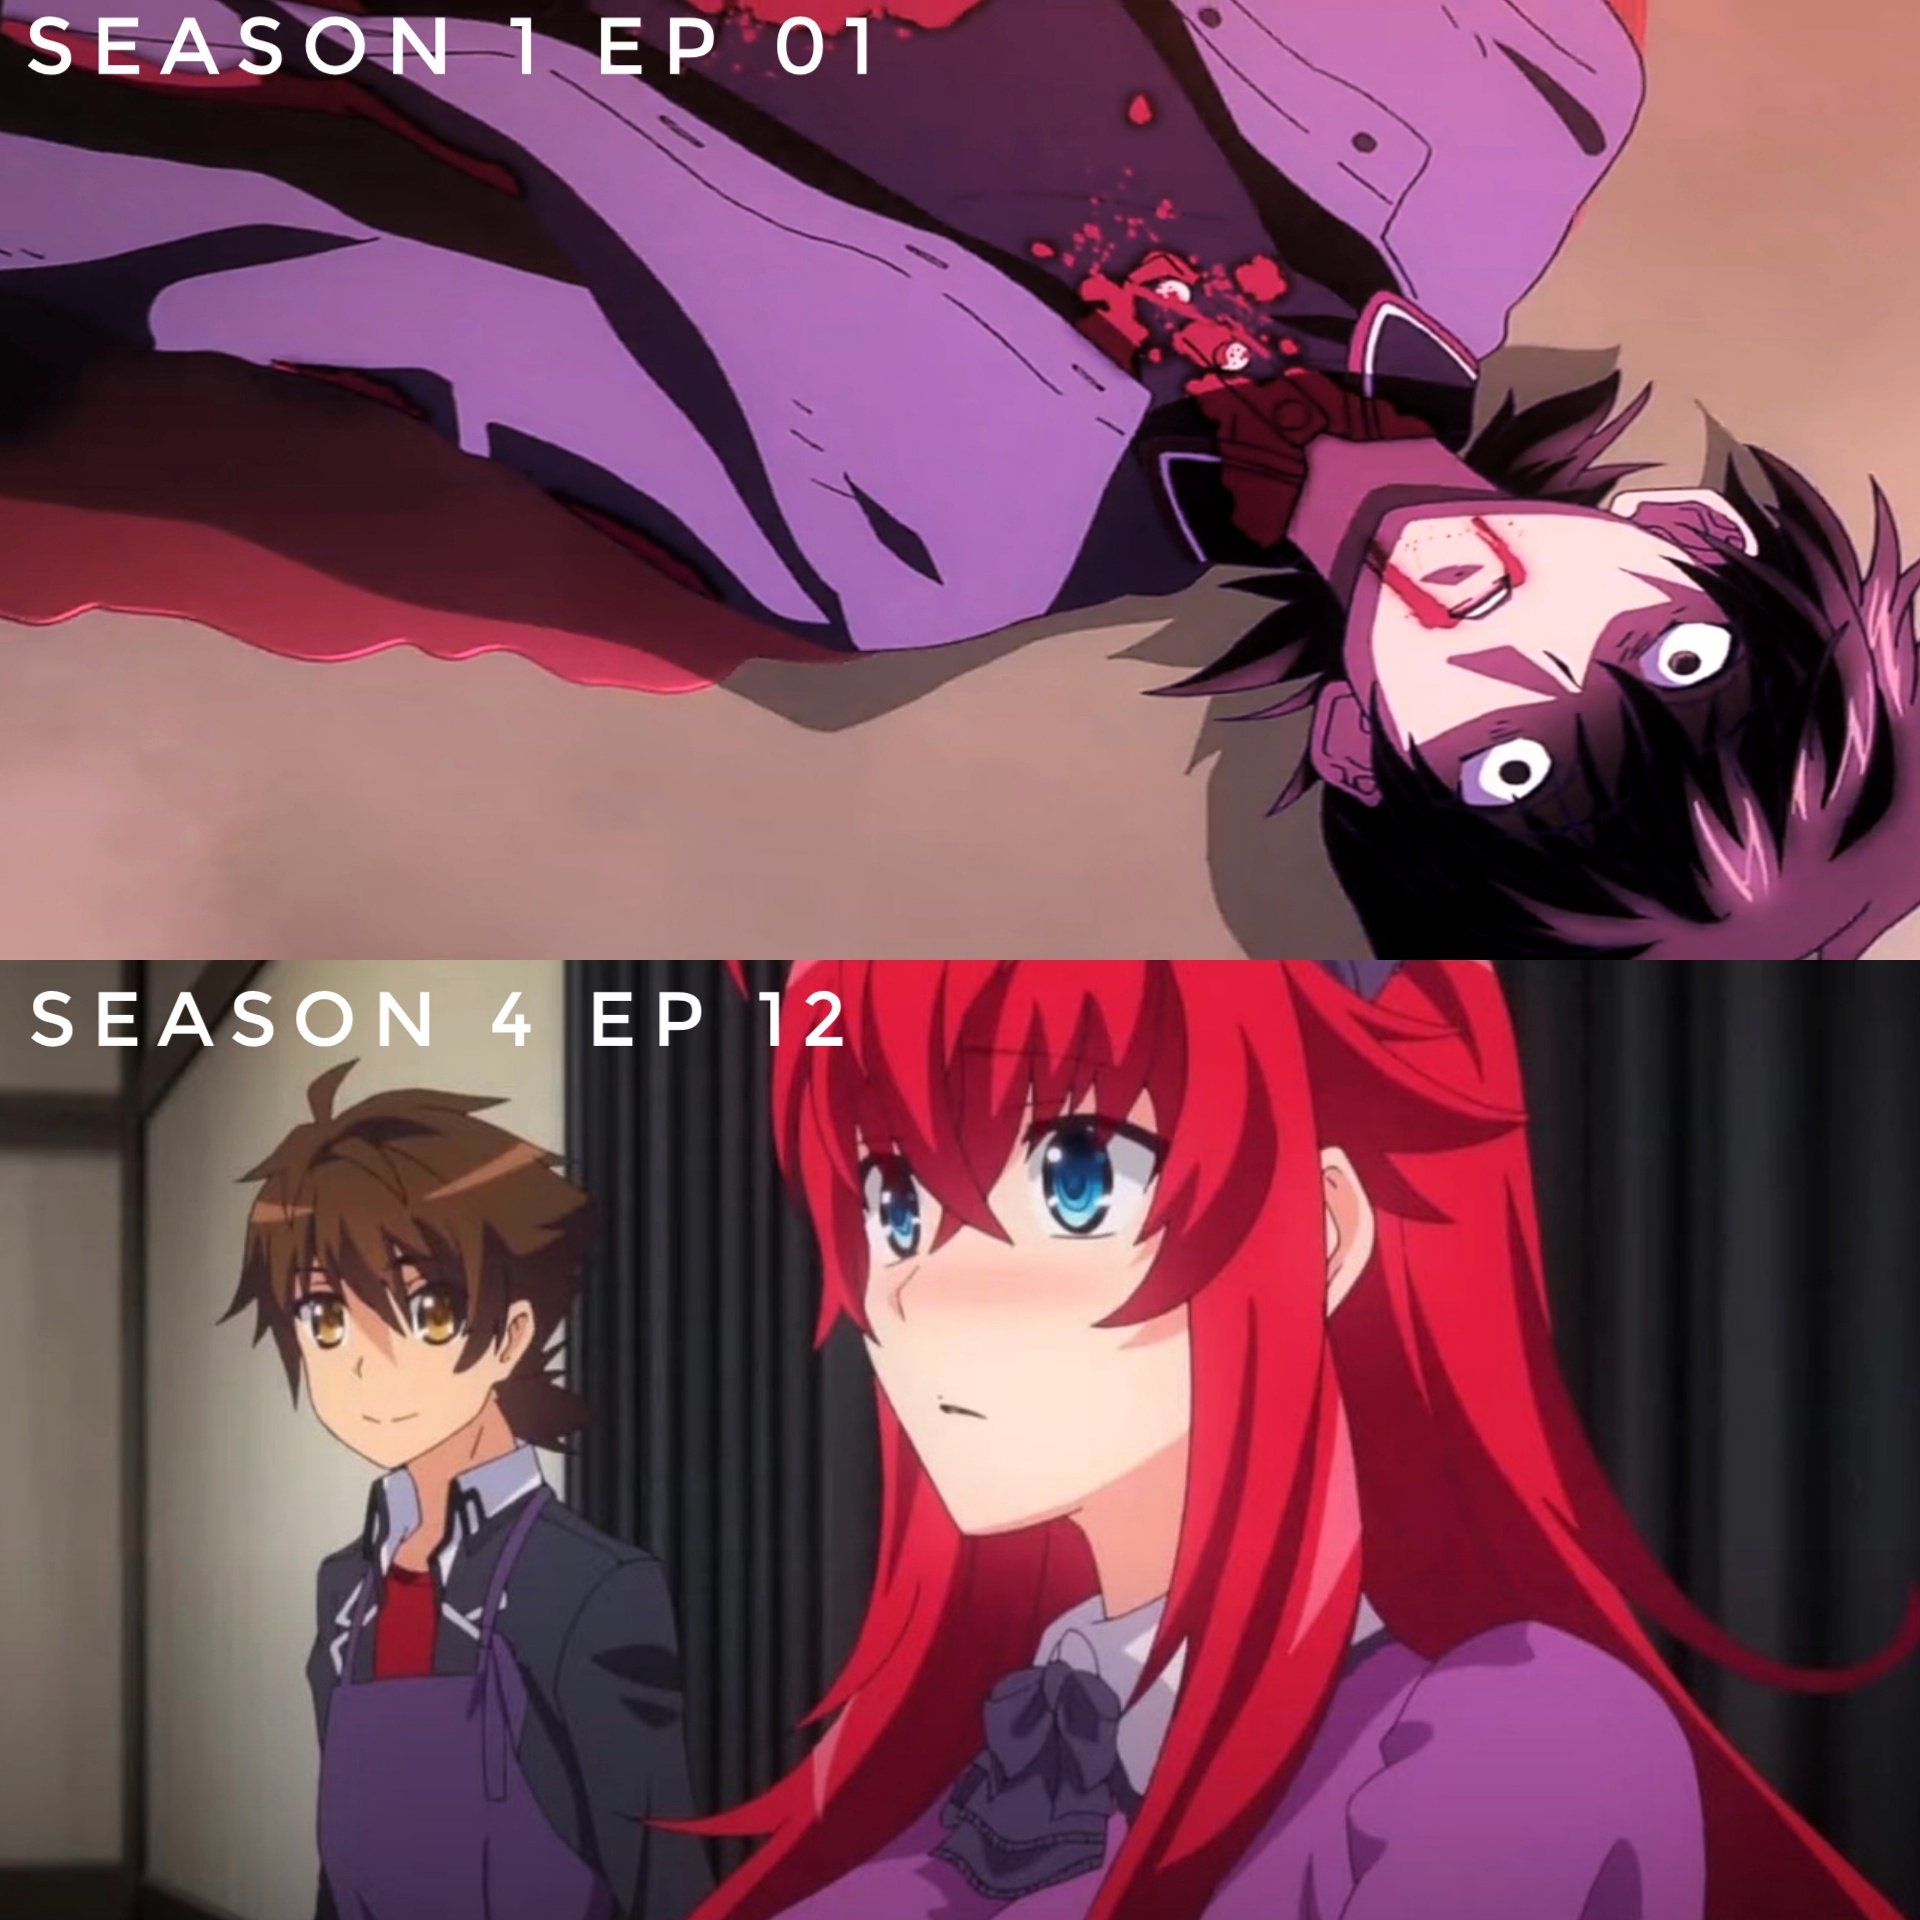 Issei The Red Dragon Emperor on X: High School DxD Season 5 is really  going to release in June or July this year??? I think Yesss! 😍  #HighSchoolDxD #RiasGremory #Issei #Anime  /